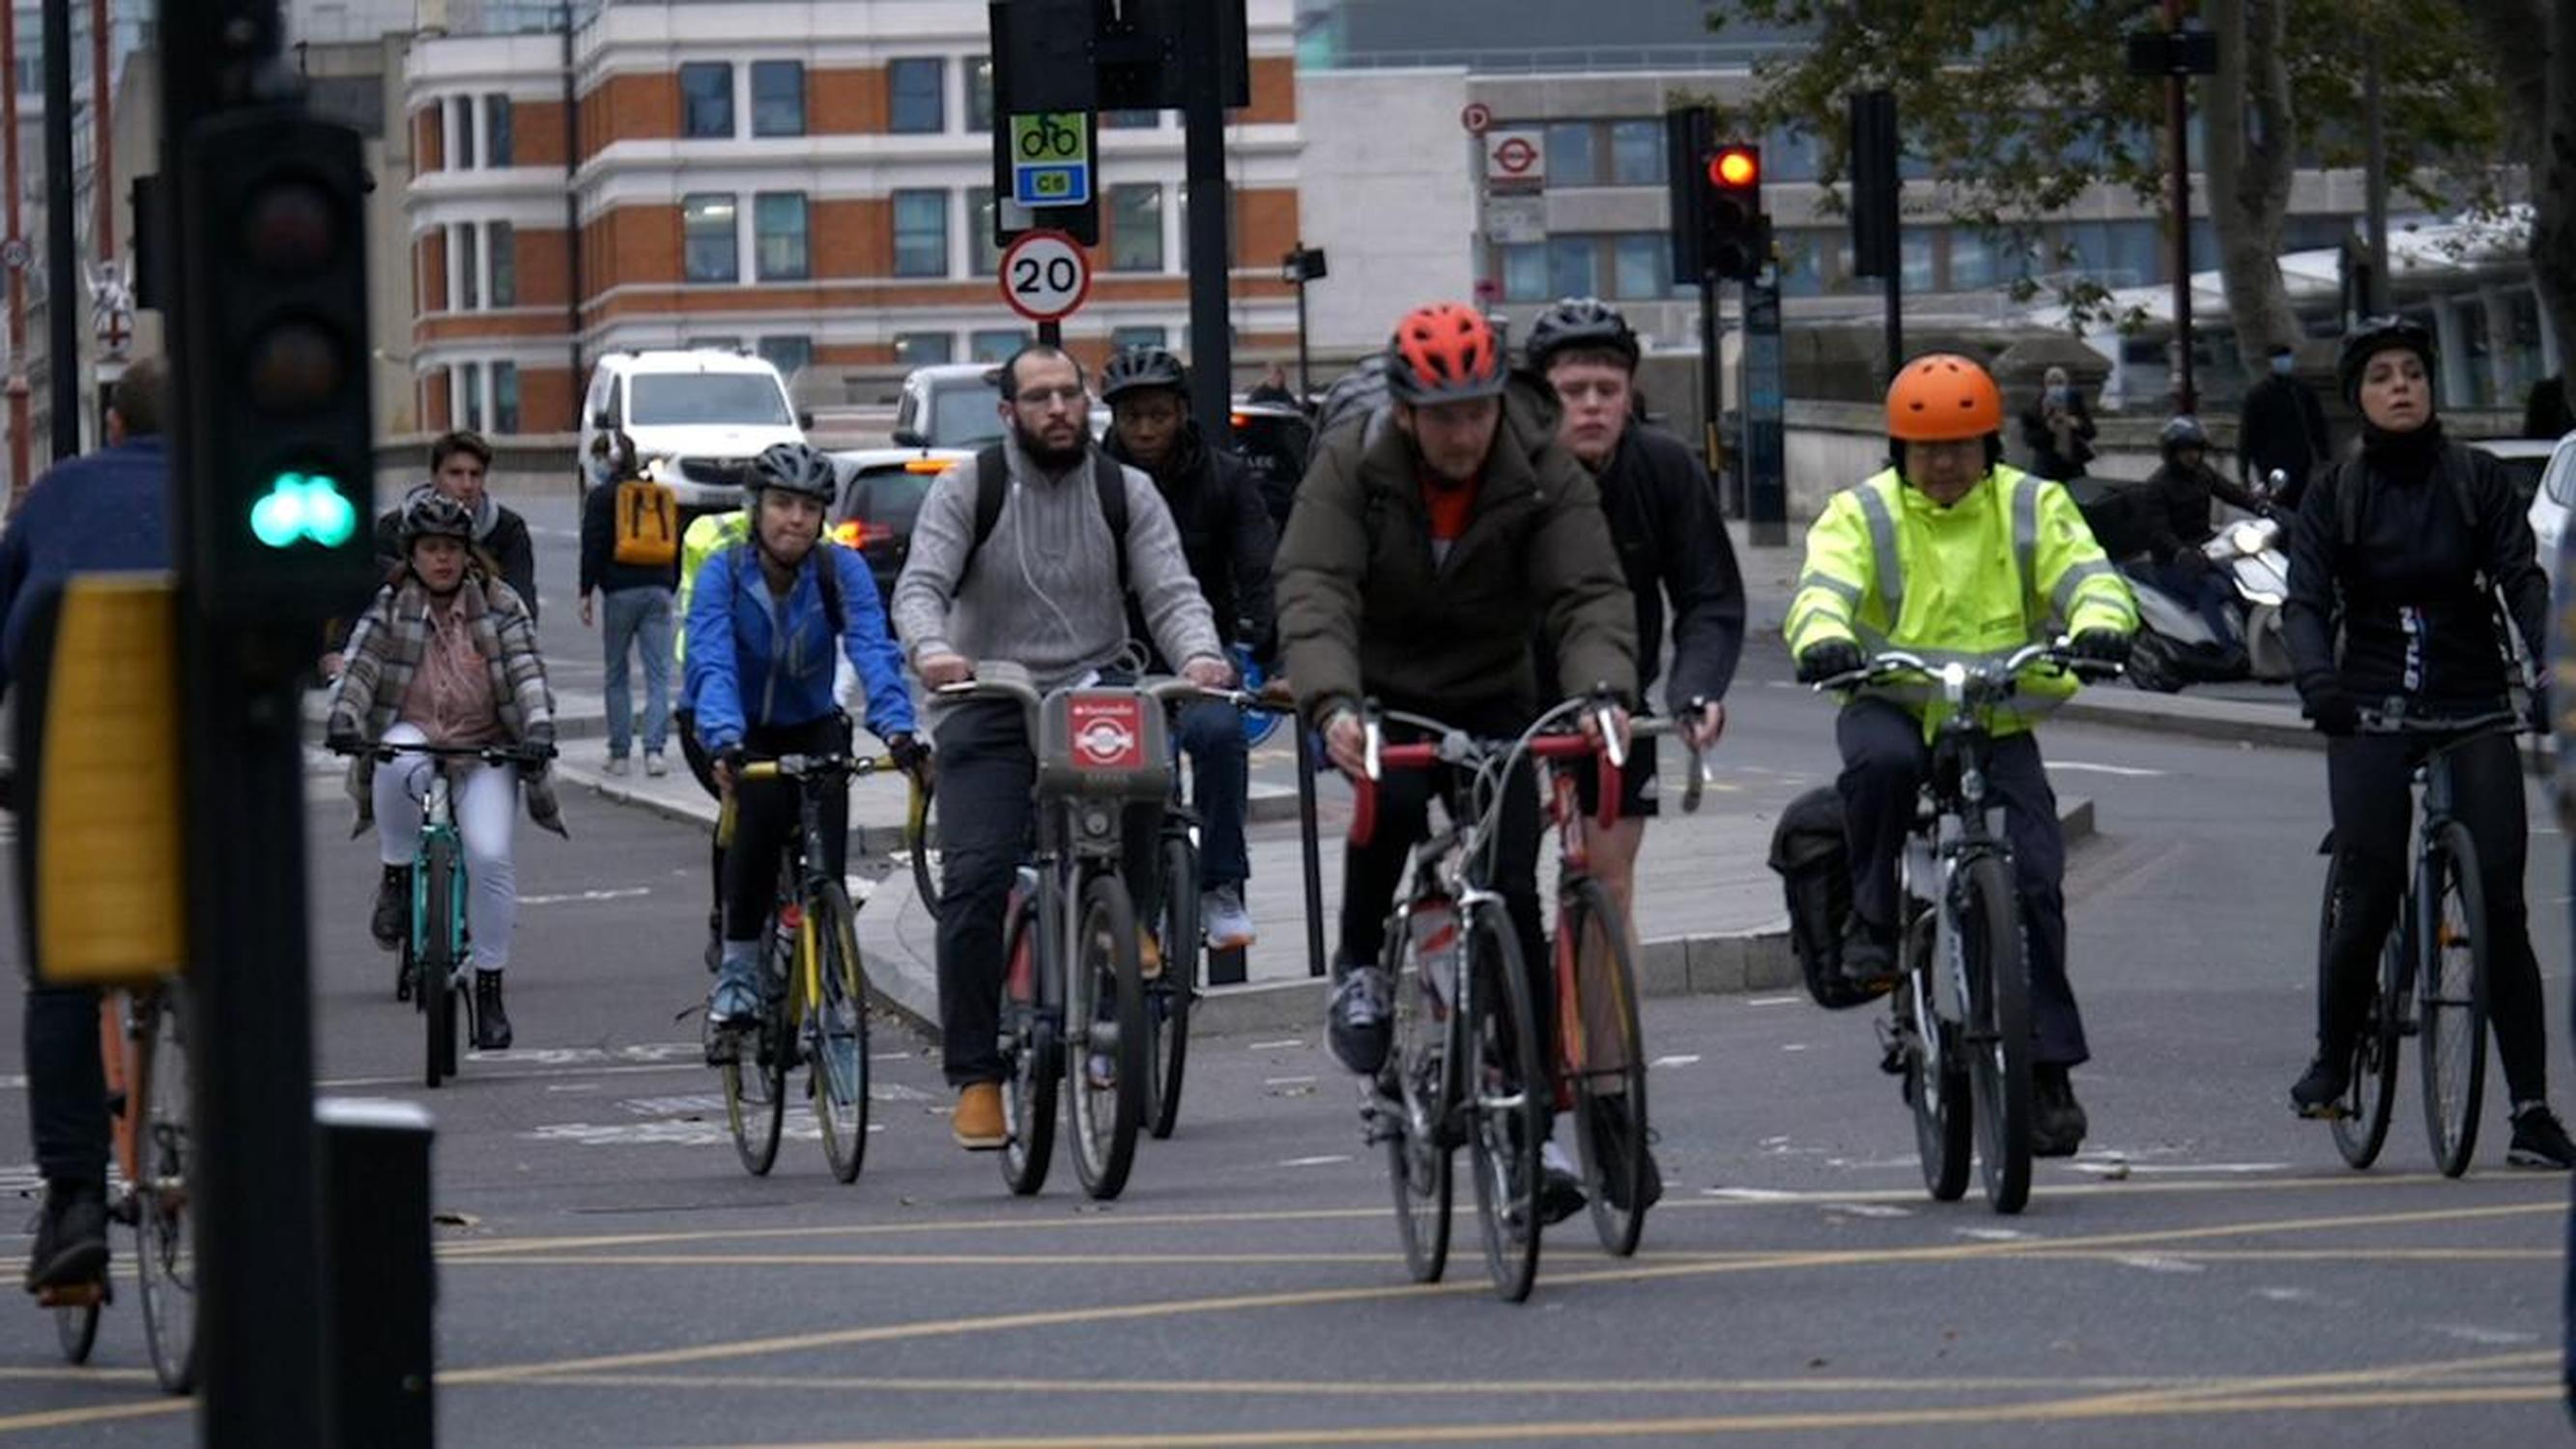 Cycling levels rose 47% on weekdays according to DfT stats